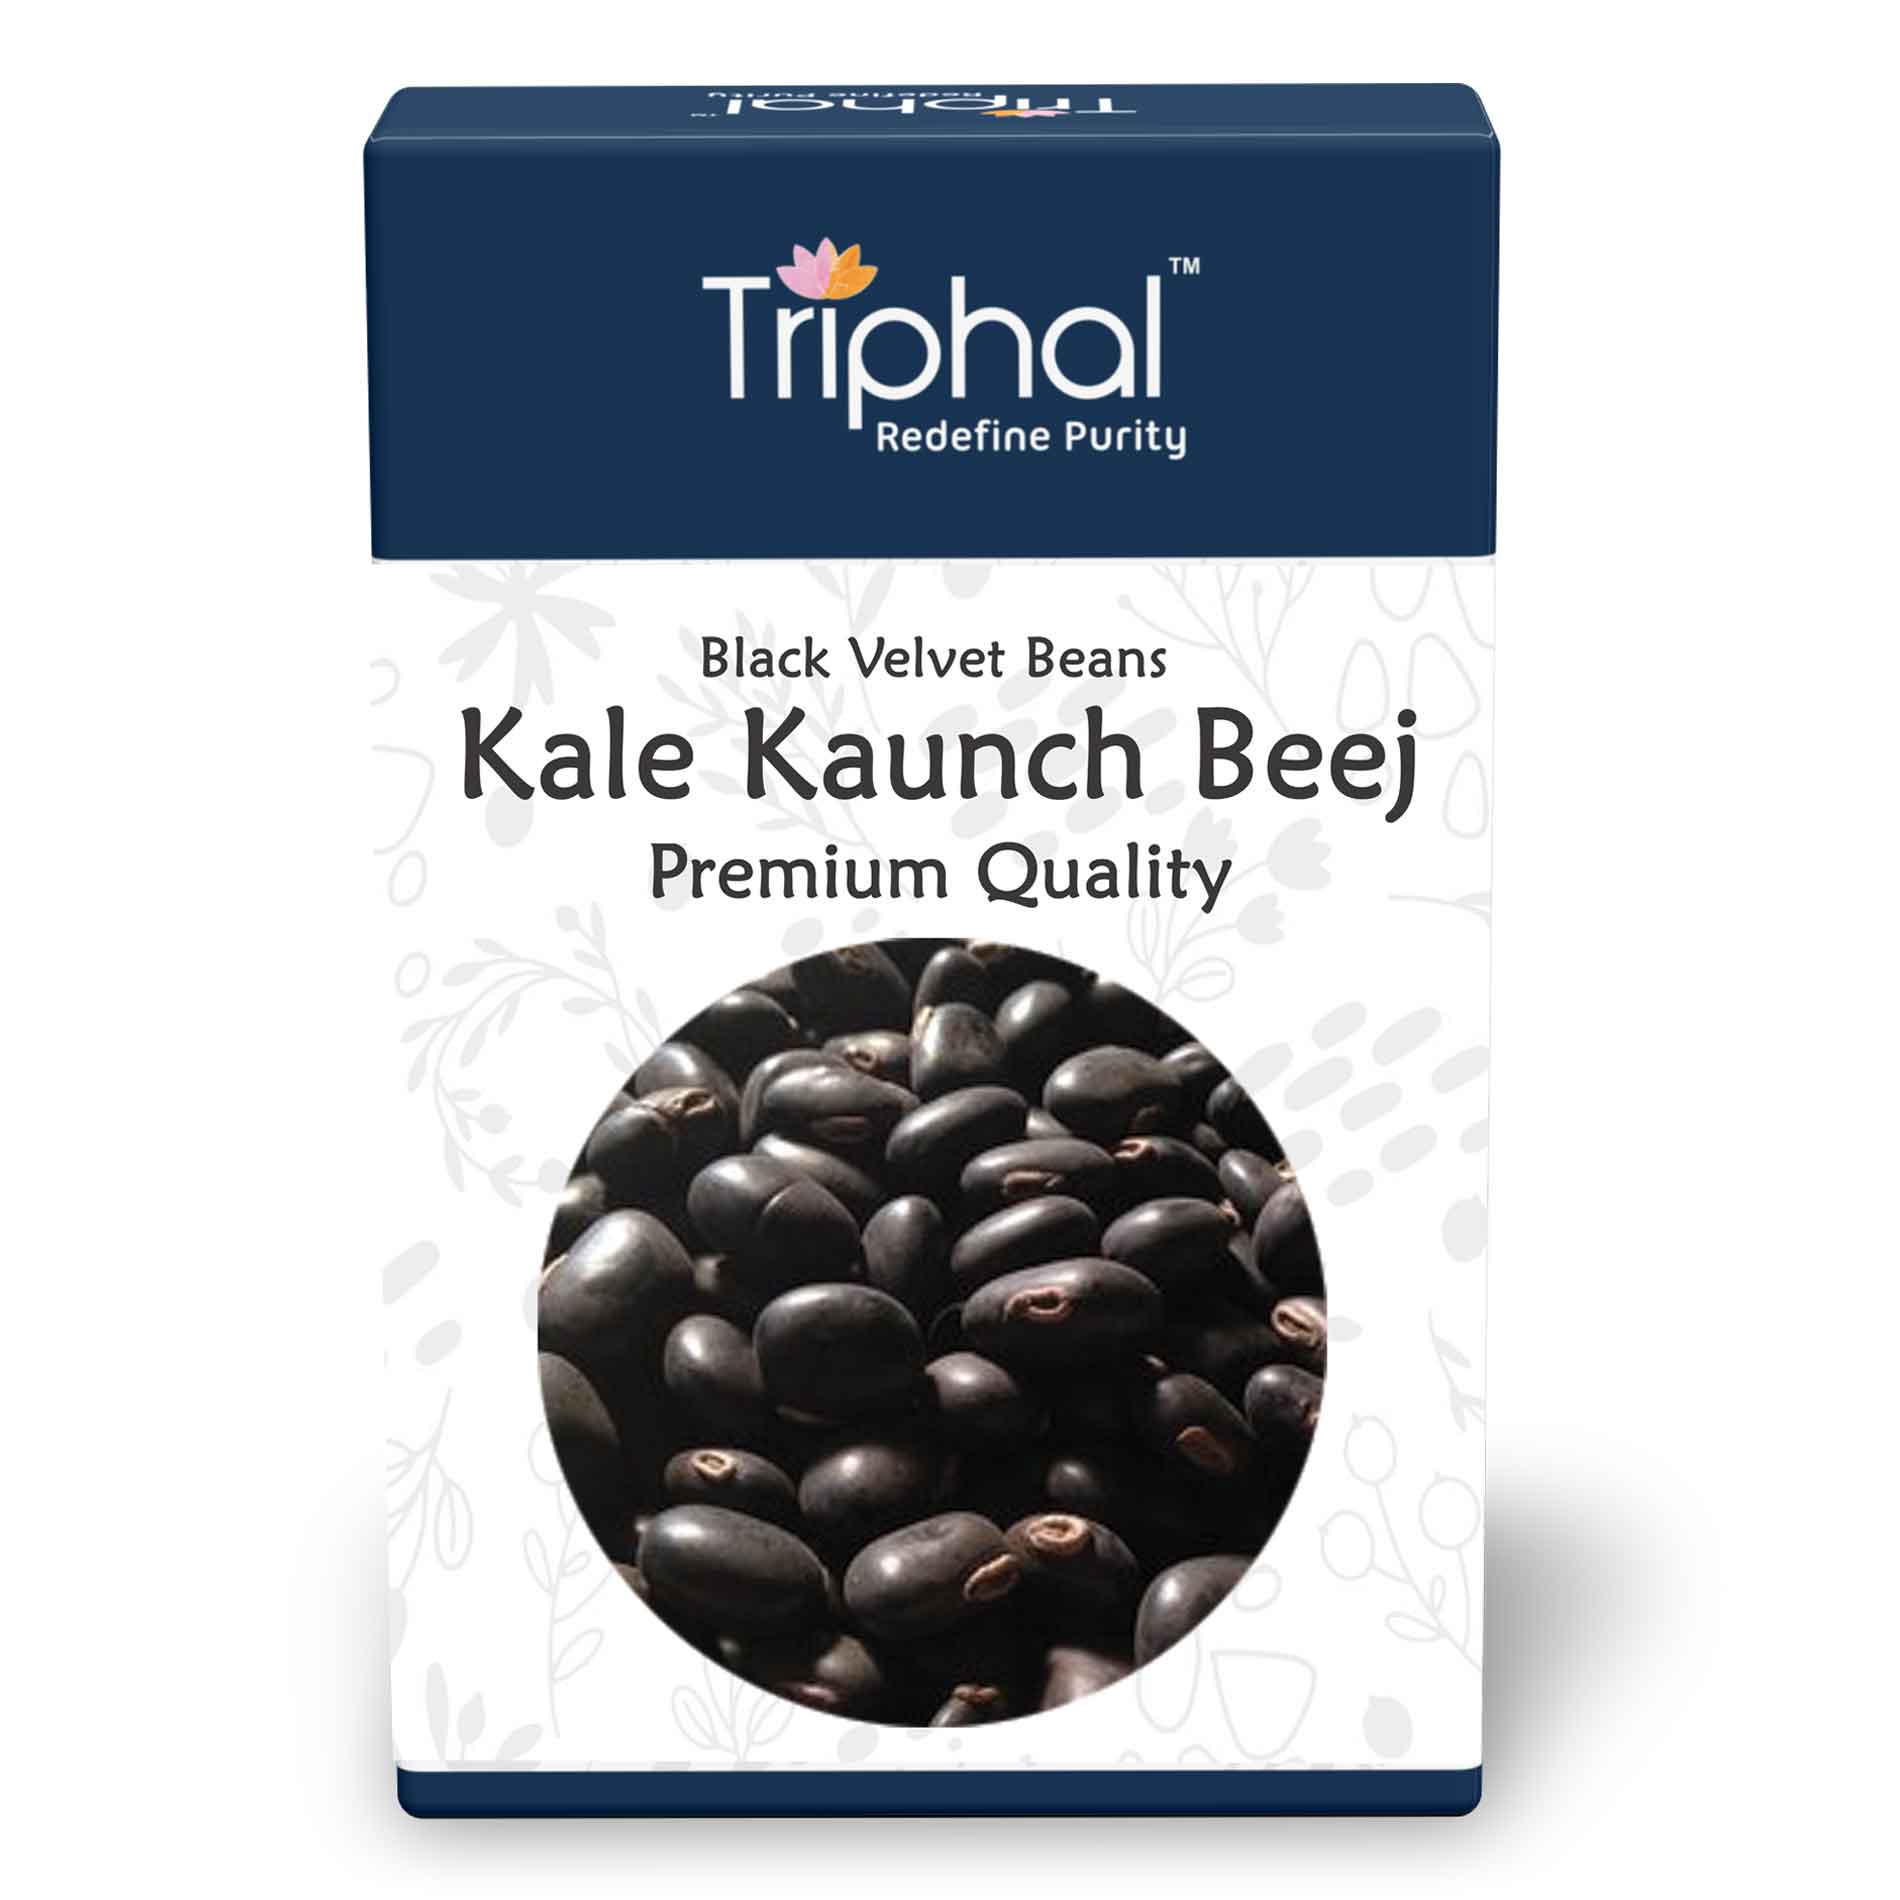 "Premium quality Kaunch Beej Kale or Konch Bij (Black Velvet Beans or Mucuna Pruriens), sourced directly from India - A natural superfood rich in L-dopa, protein, fiber, and essential minerals - Available in whole seed form for enhanced testosterone, mood, fertility, and wellness.